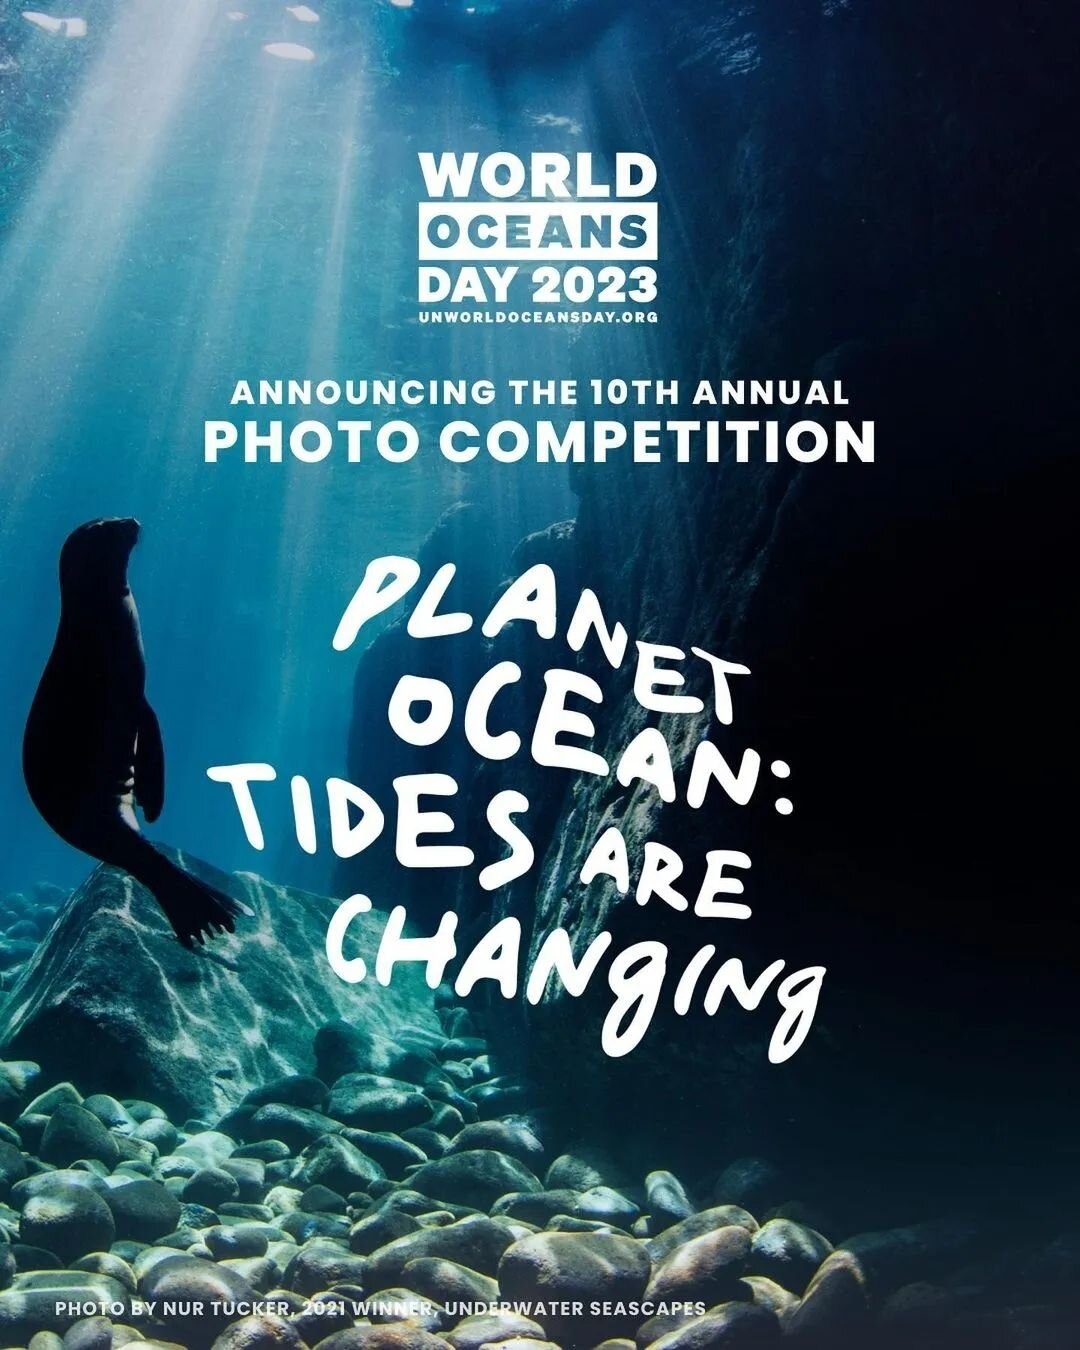 By @oceanic.global
 🎉. The submissions for the 10th annual Photo Competition for #UNWorldOceansDay are now open until April 23, 2023!⁠ 🎉

The milestone competition presents a unique opportunity for photographers to showcase the immense breadth and 